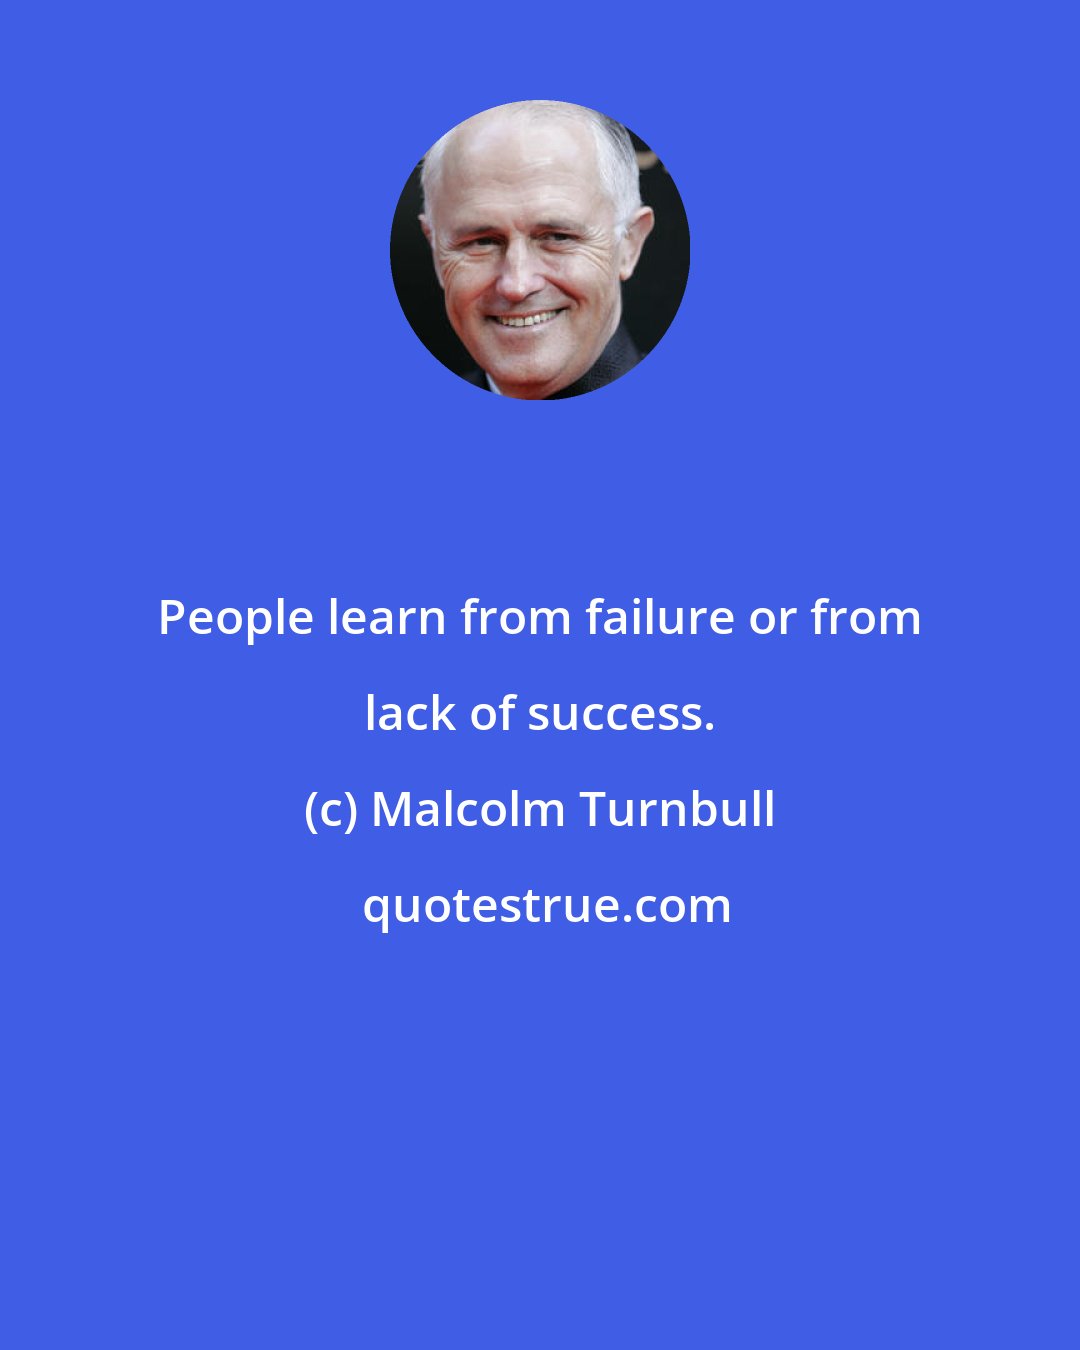 Malcolm Turnbull: People learn from failure or from lack of success.